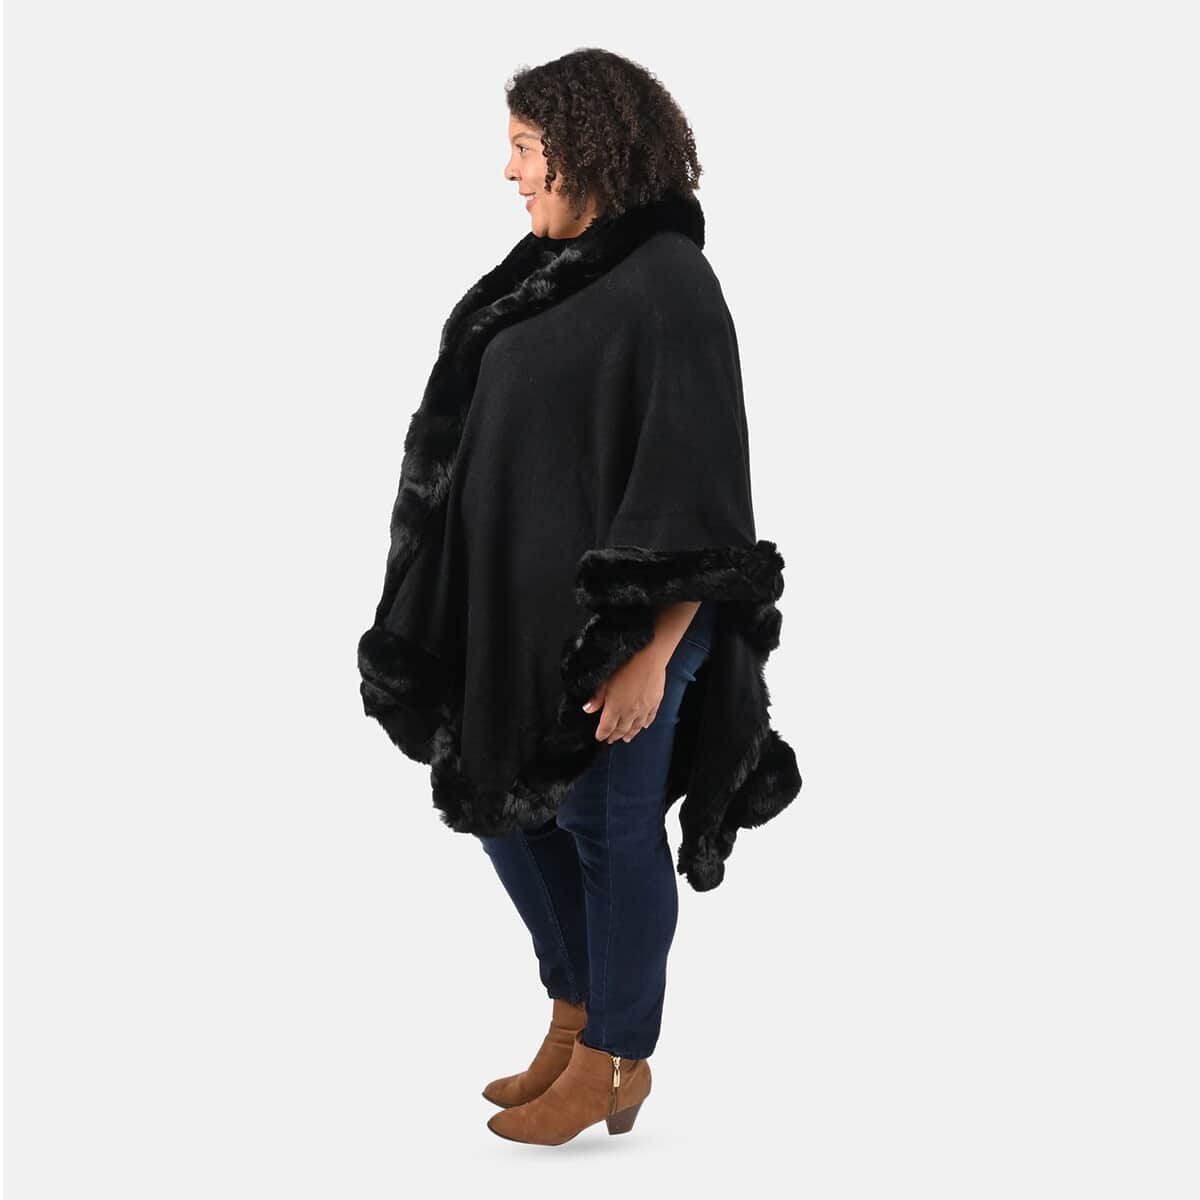 TAMSY Black Ruana with Faux Fur Trim - One Size Fits Most image number 2